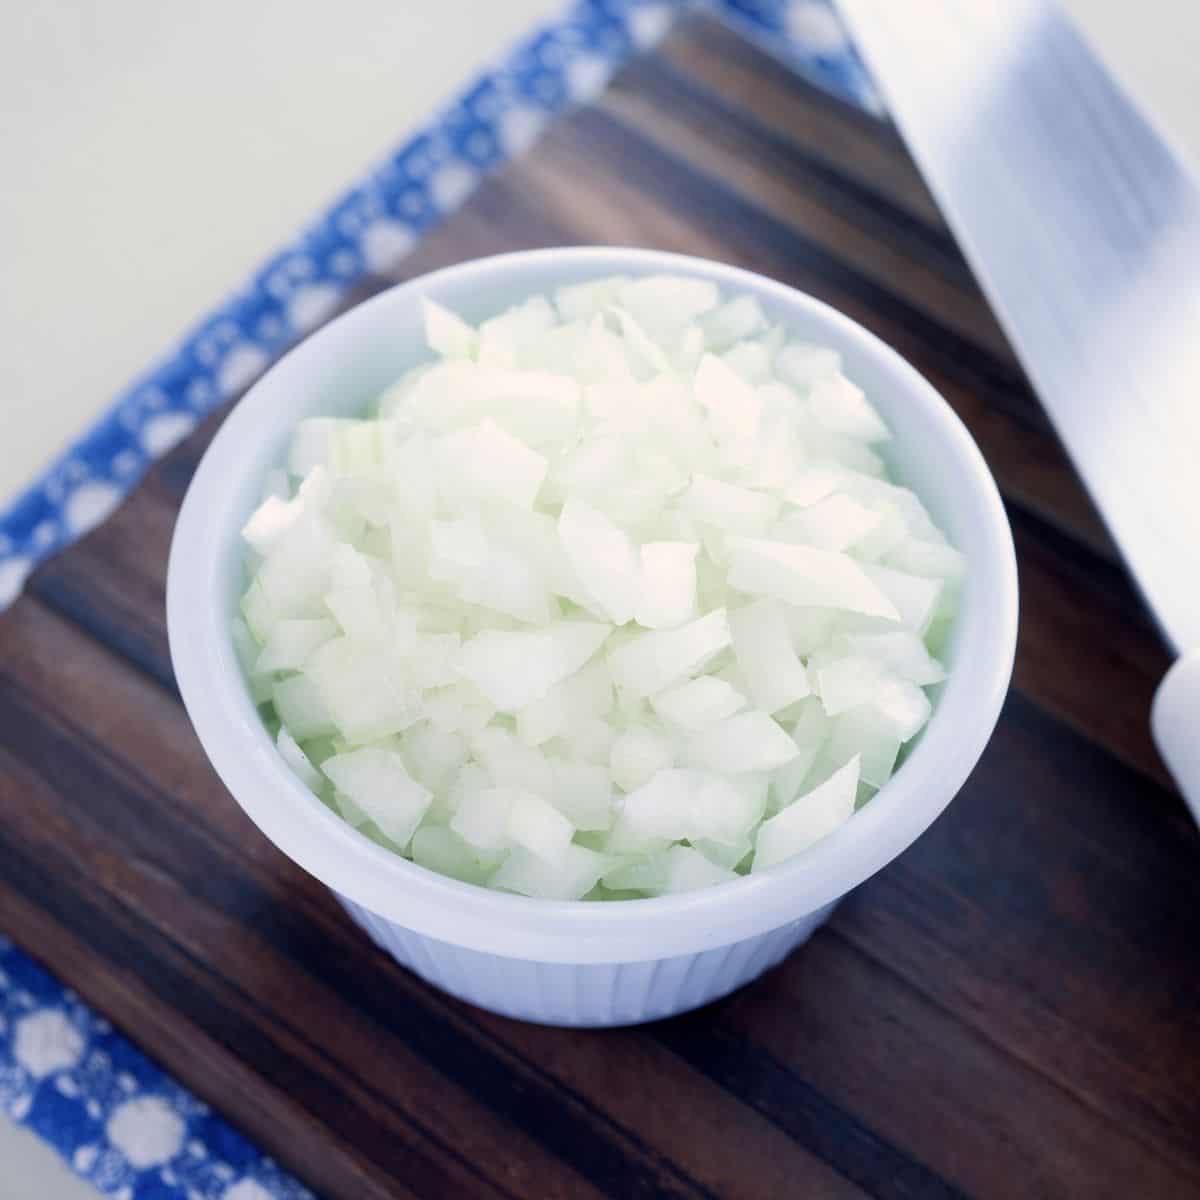 diced onions in a small white bowl on a wooden table